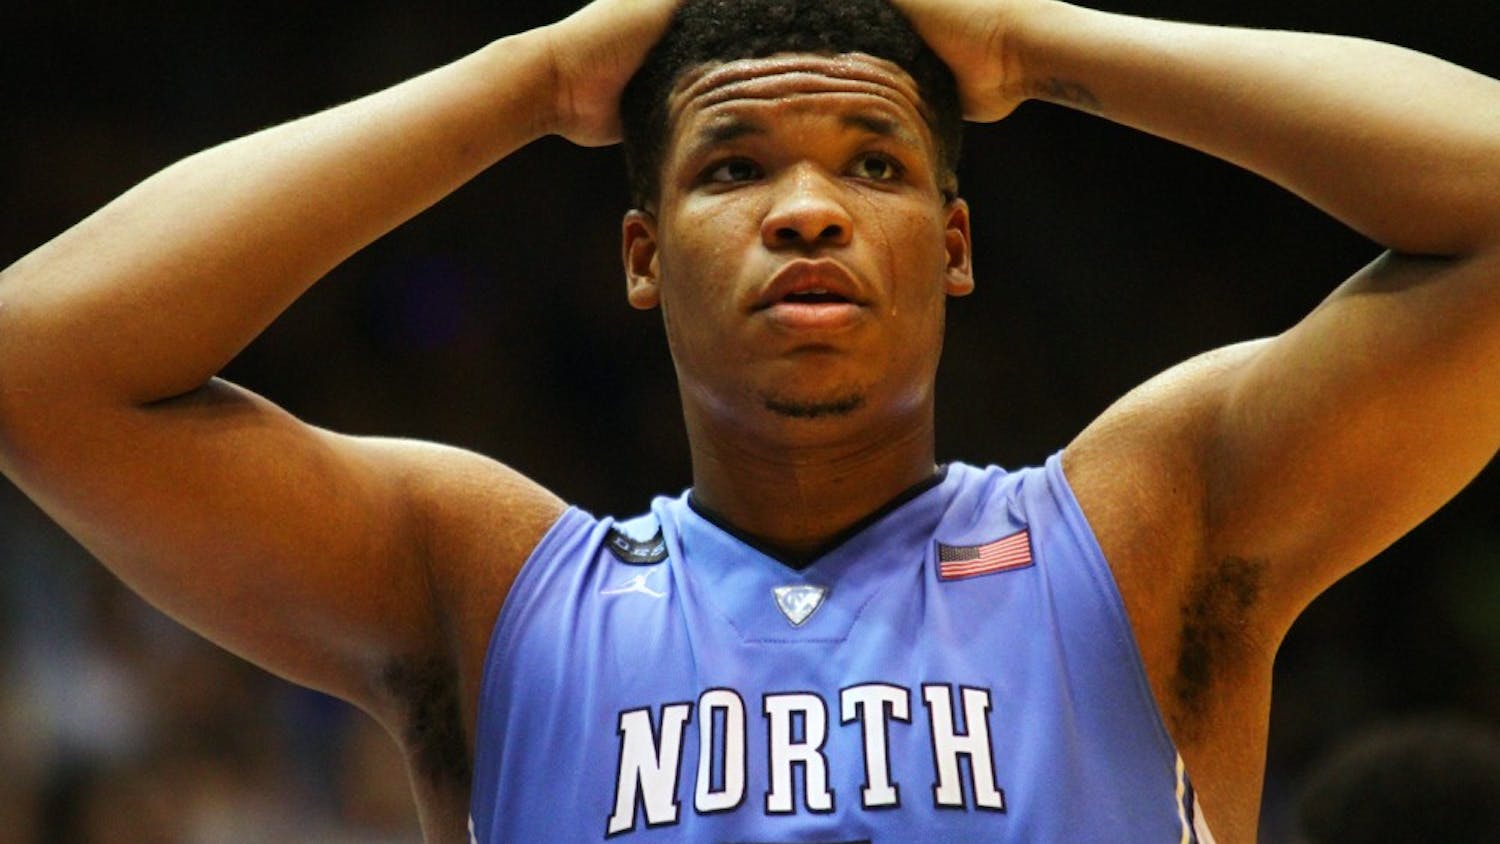 UNC forward Kennedy Meeks (3) scored 18 points against the Blue Devils.